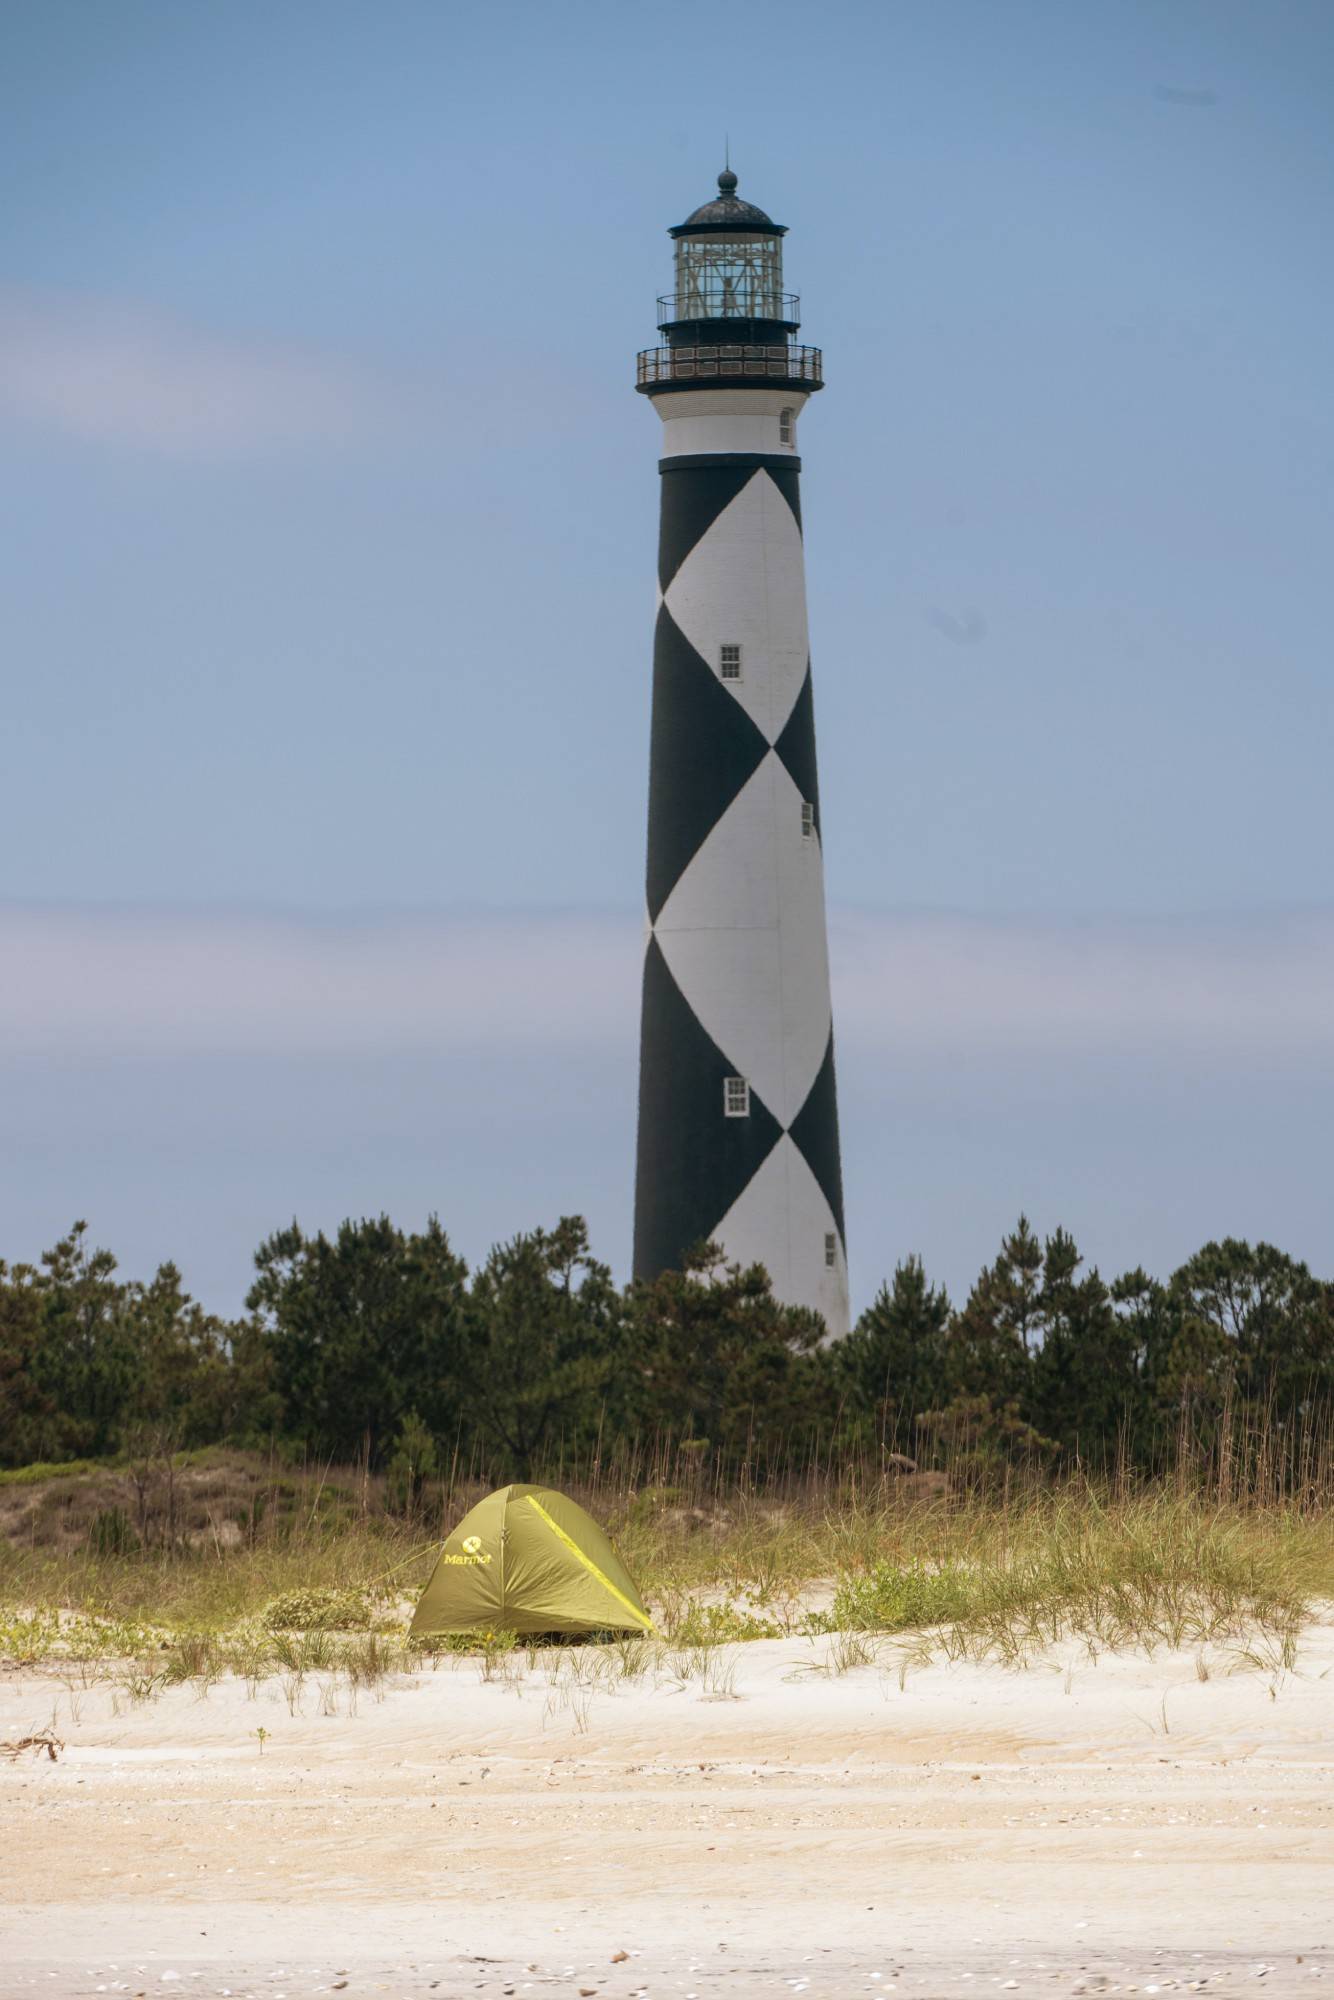 Students camped in the shadow of Cape Lookout Lighthouse on the third night in the Outer Banks.